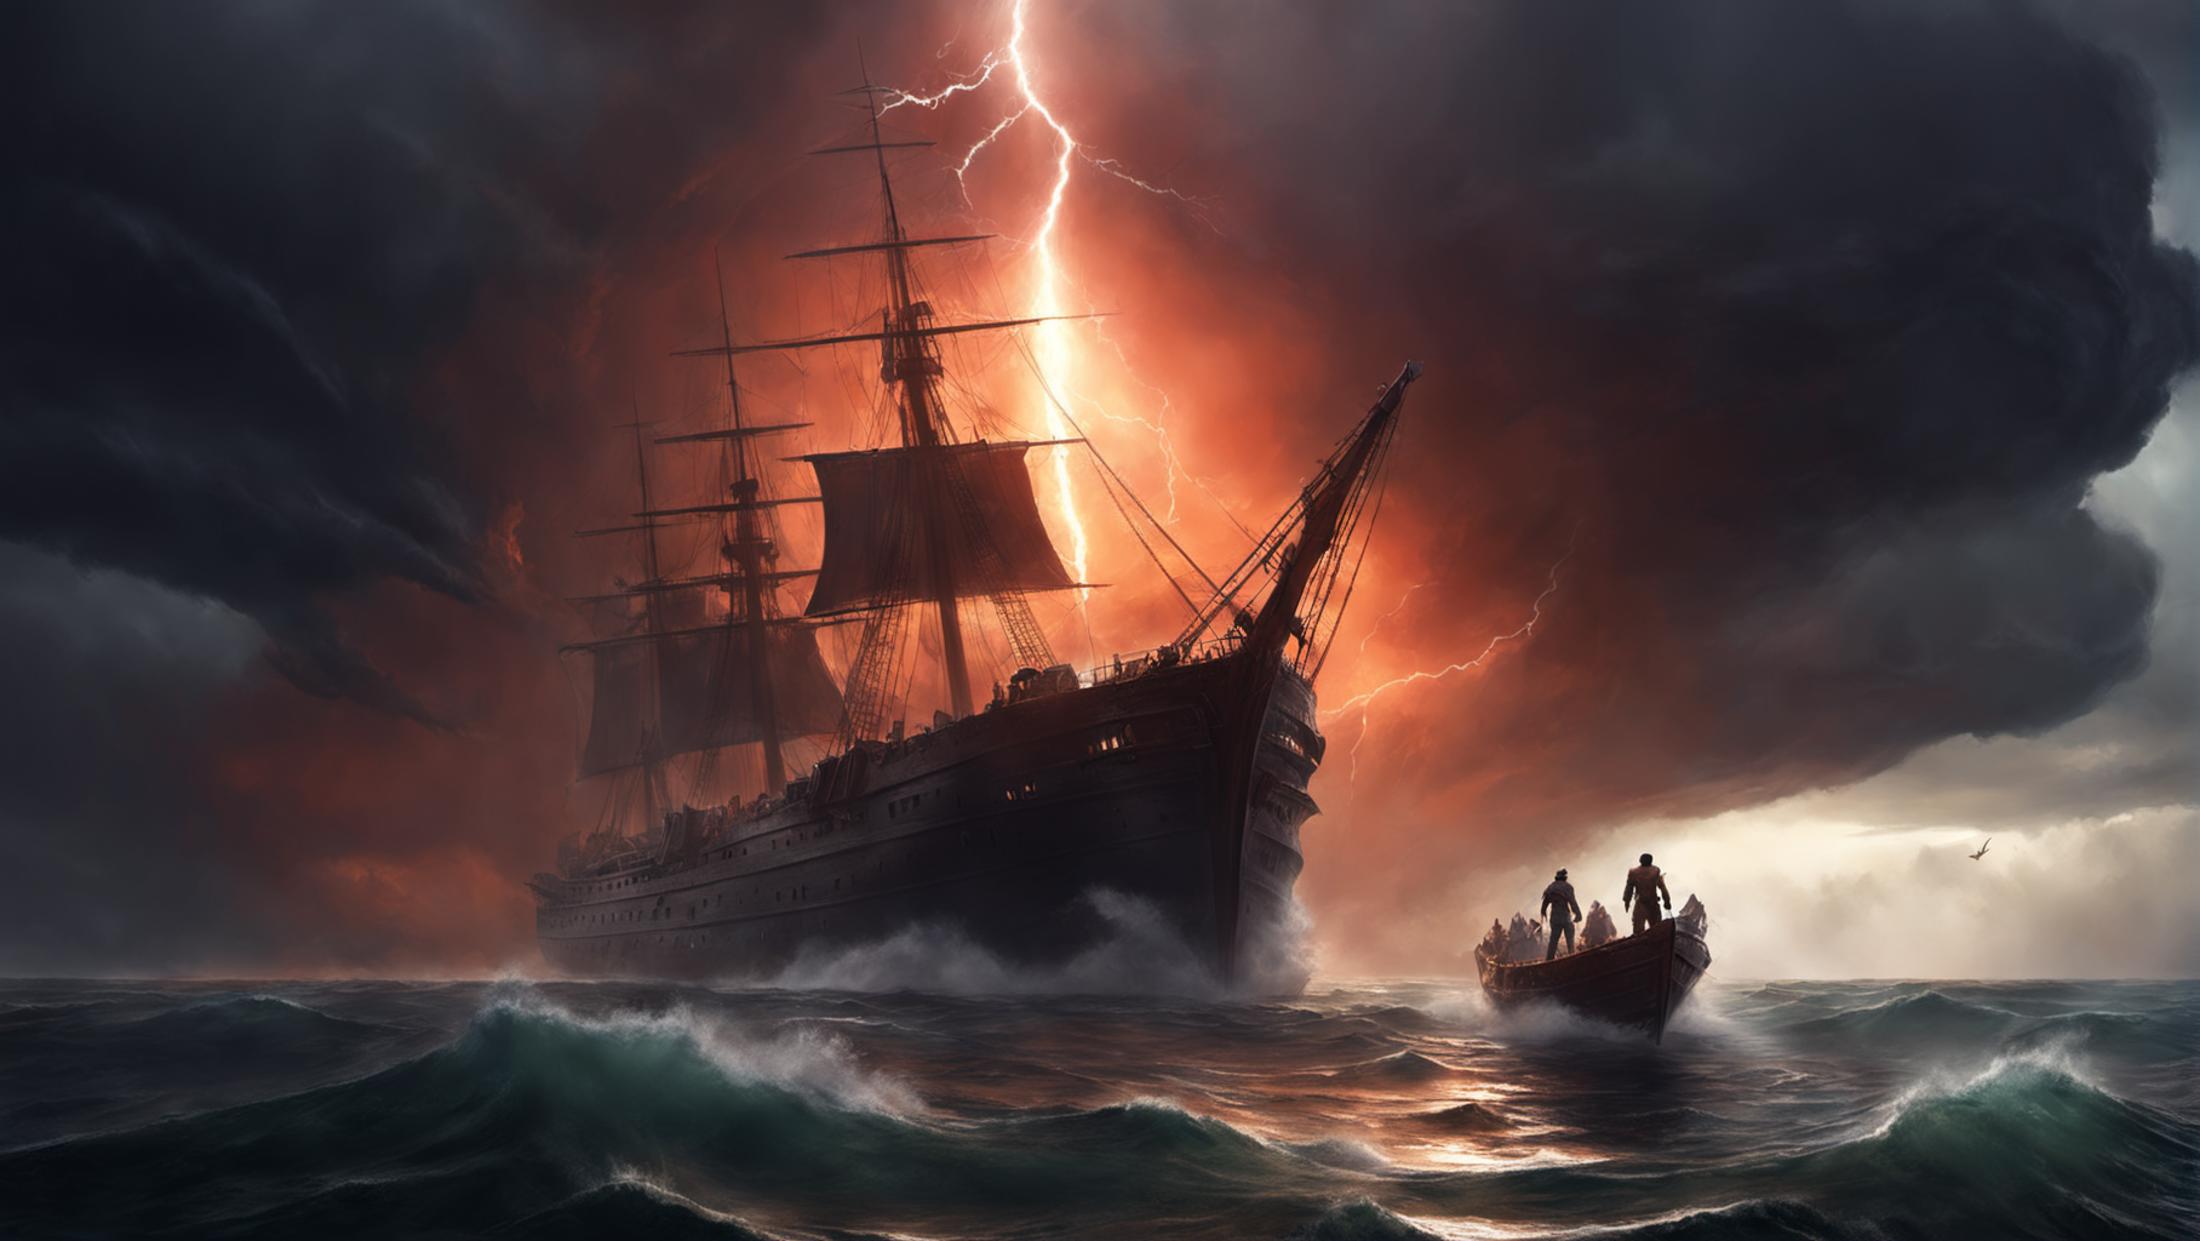 A painting of a large pirate ship in the ocean with lightning in the background.